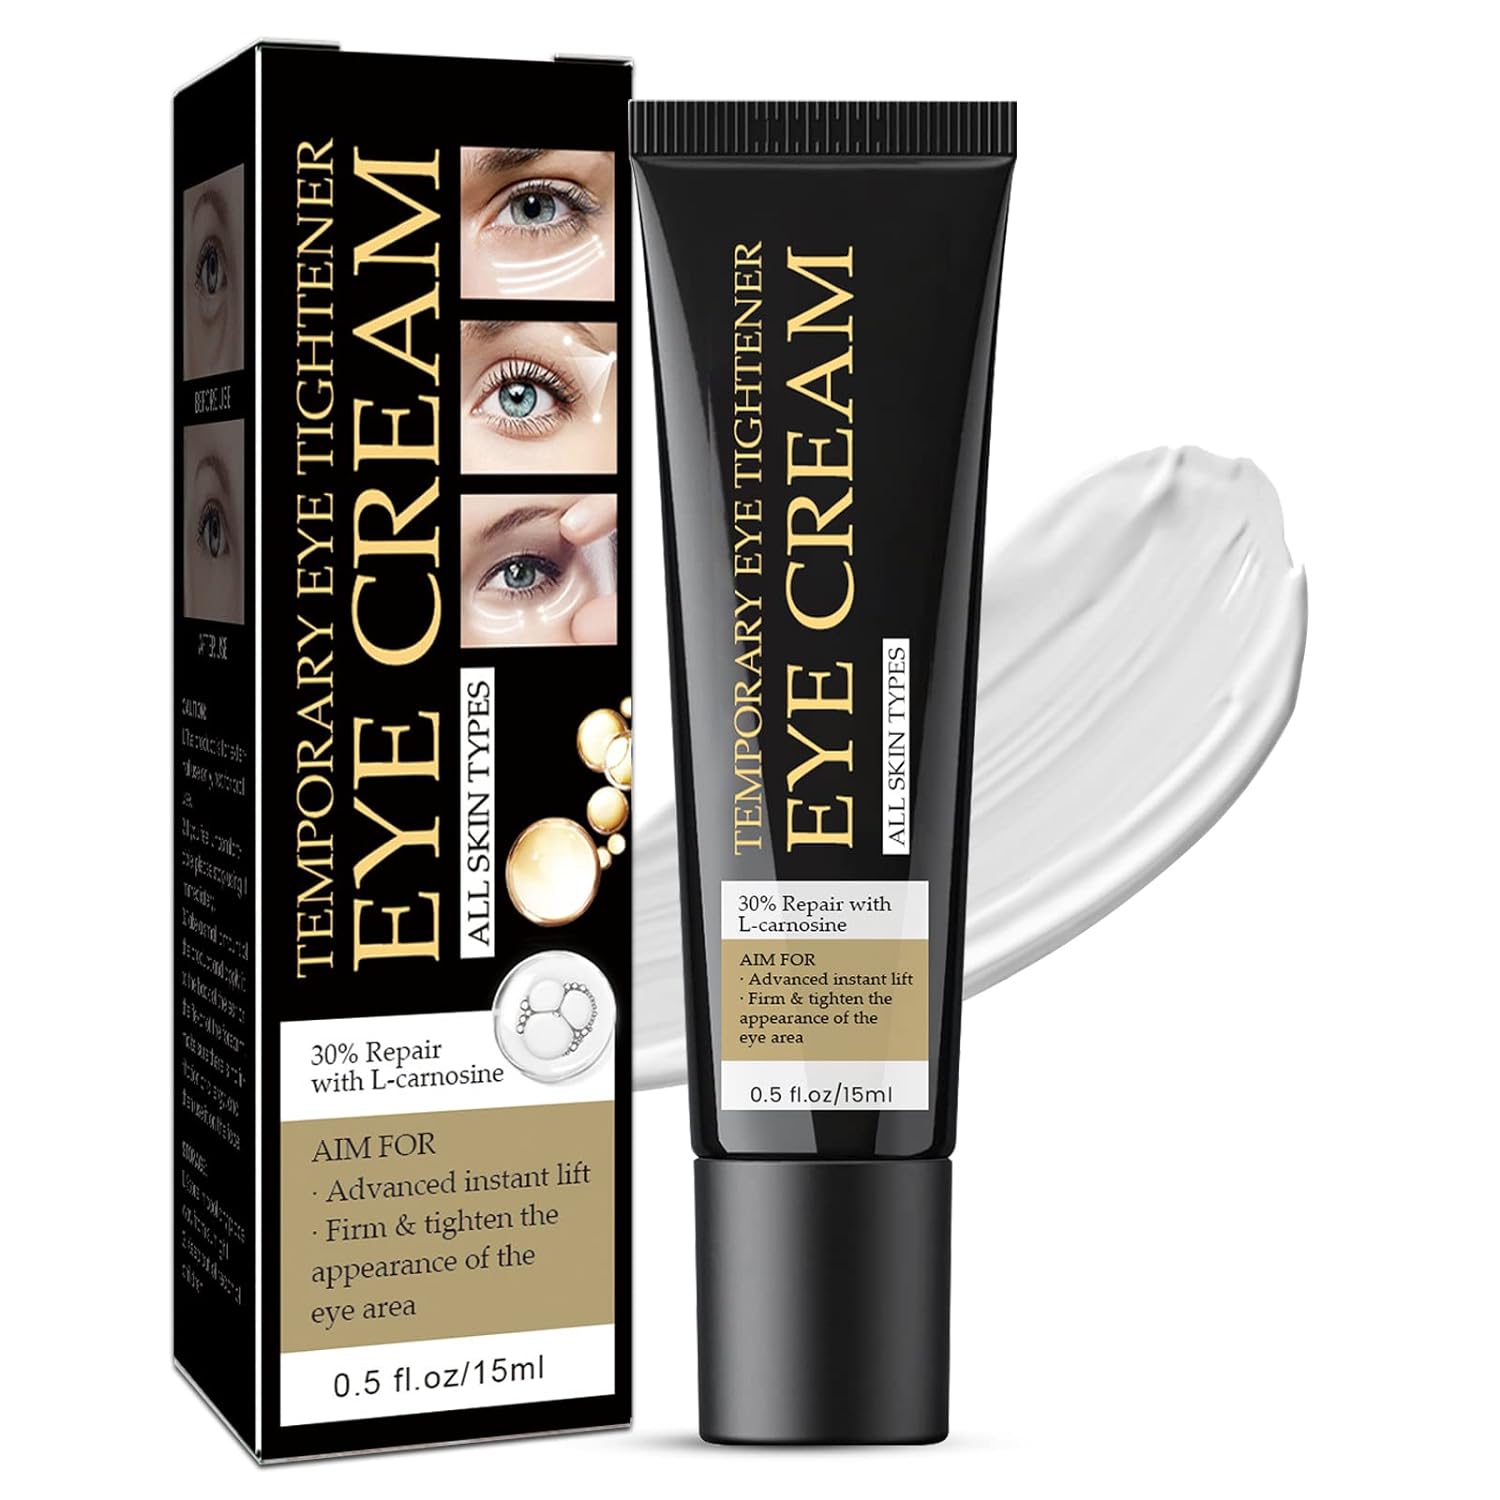 Eye Cream for Dark Circles and Puffiness,Eye Repair Gel-Cream for Removing Eye Bags,Fade Eye Lines & Refresh Your Skin,24 Hour Hydration for All Skin Types